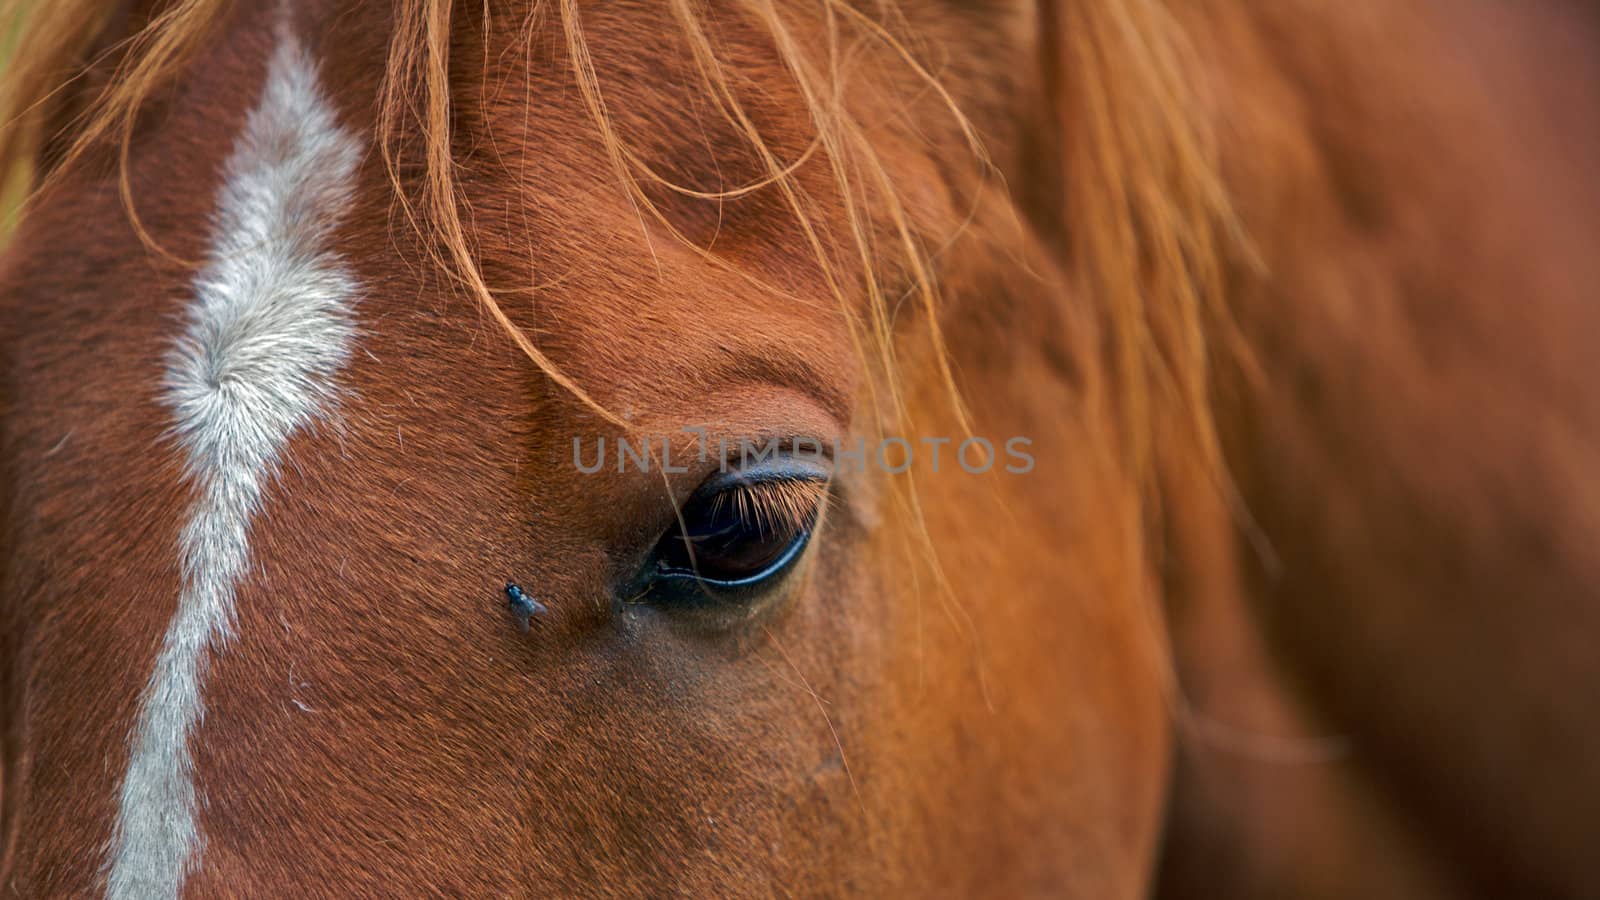 A brown horse with a fly near its eye, close up







Horse close up of the eye